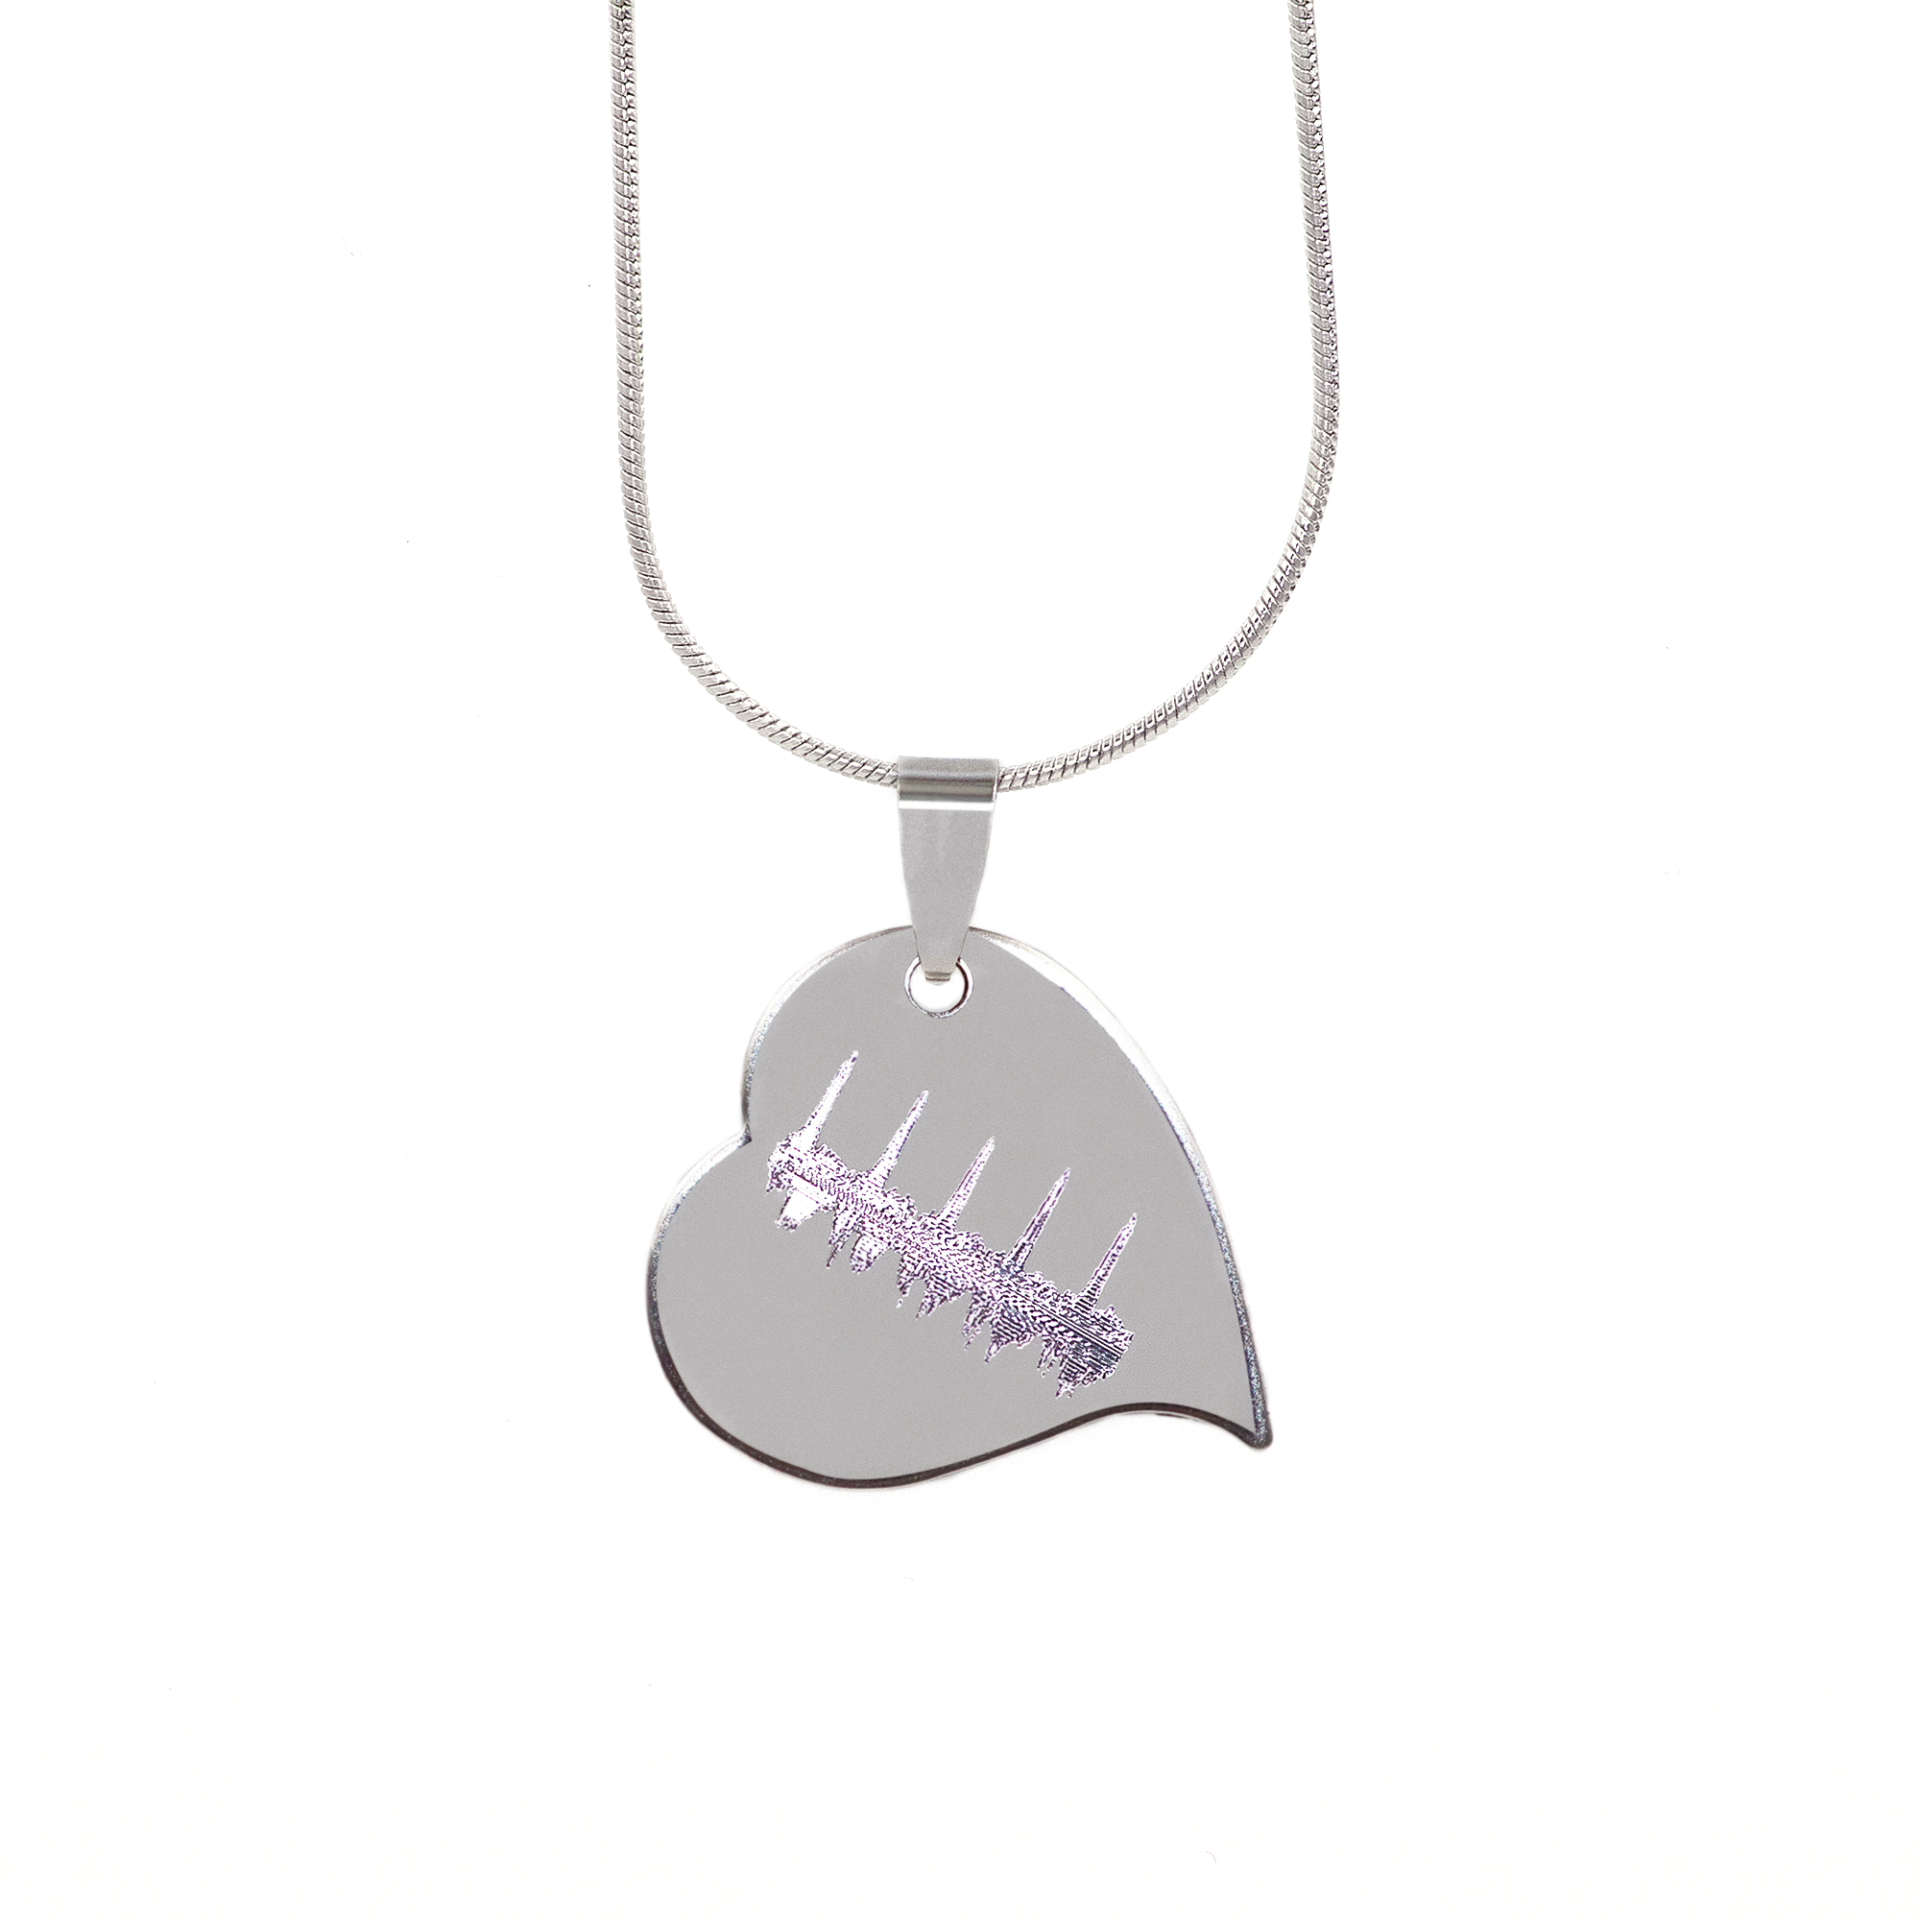 Heartbeat Charm Necklace Using an Ultrasound Heartbeat Waveform in Stainless Steel Tilted Heart Charm